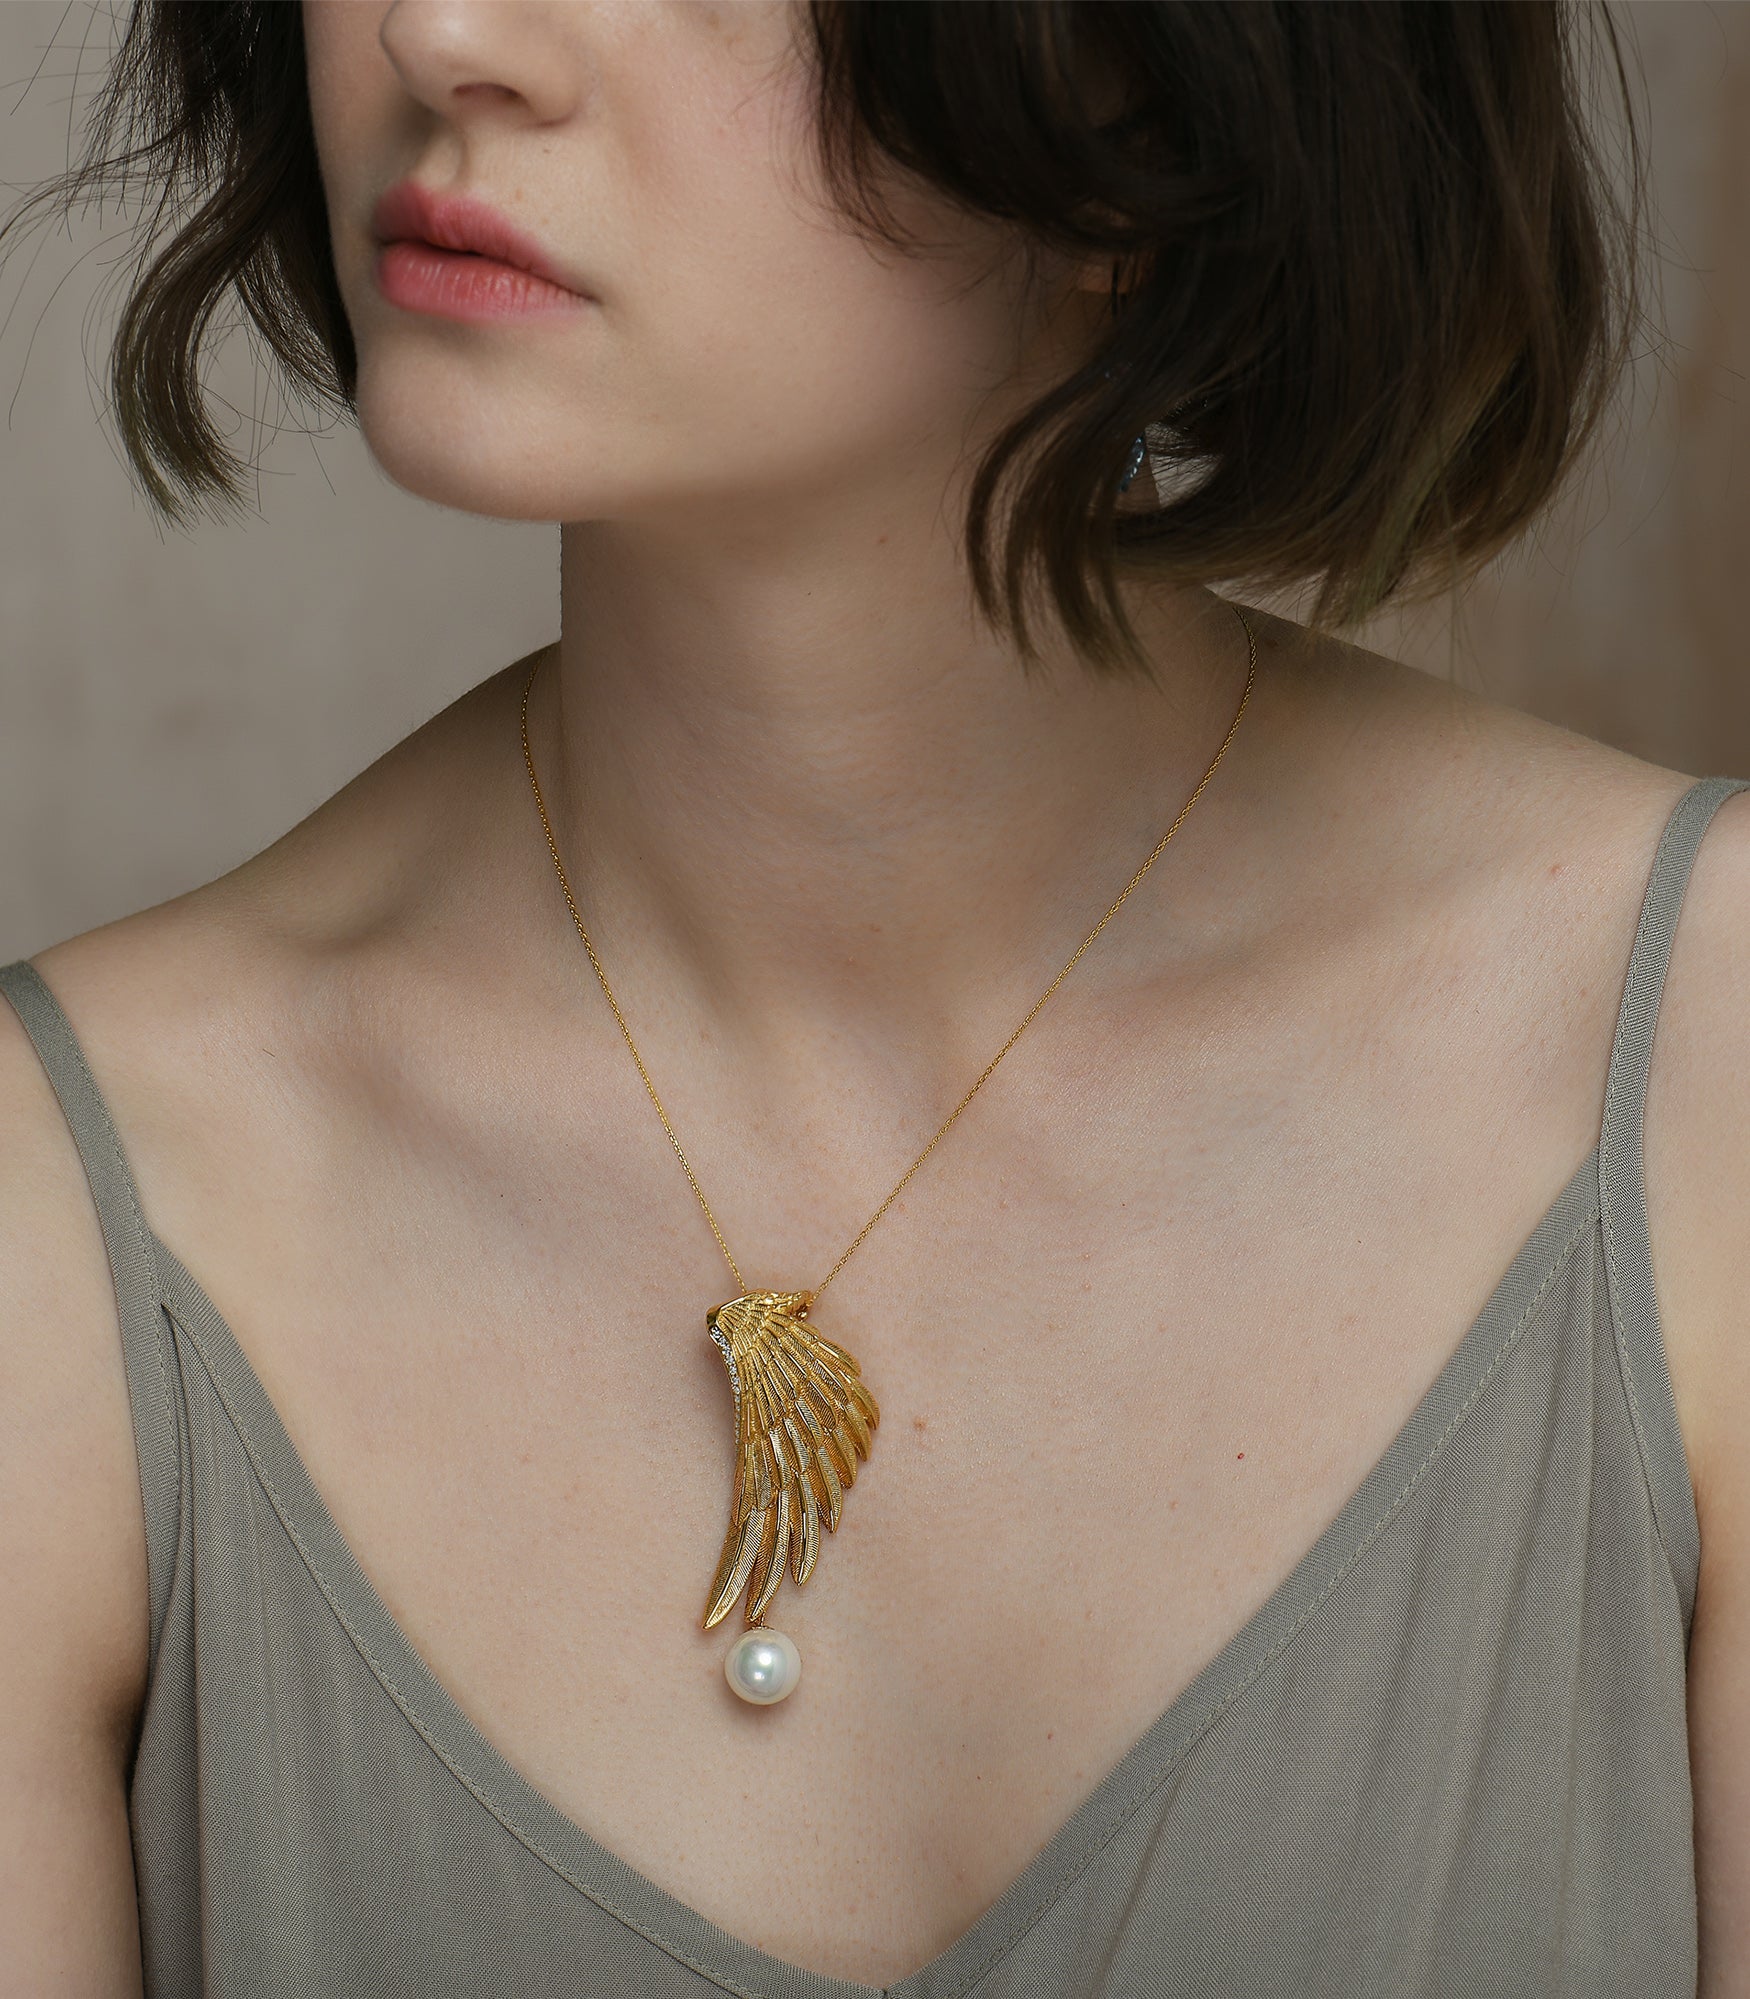 A lady wearing a gold vermeil necklace which has an eagle wing pendant  with a white pearl hanging from it.